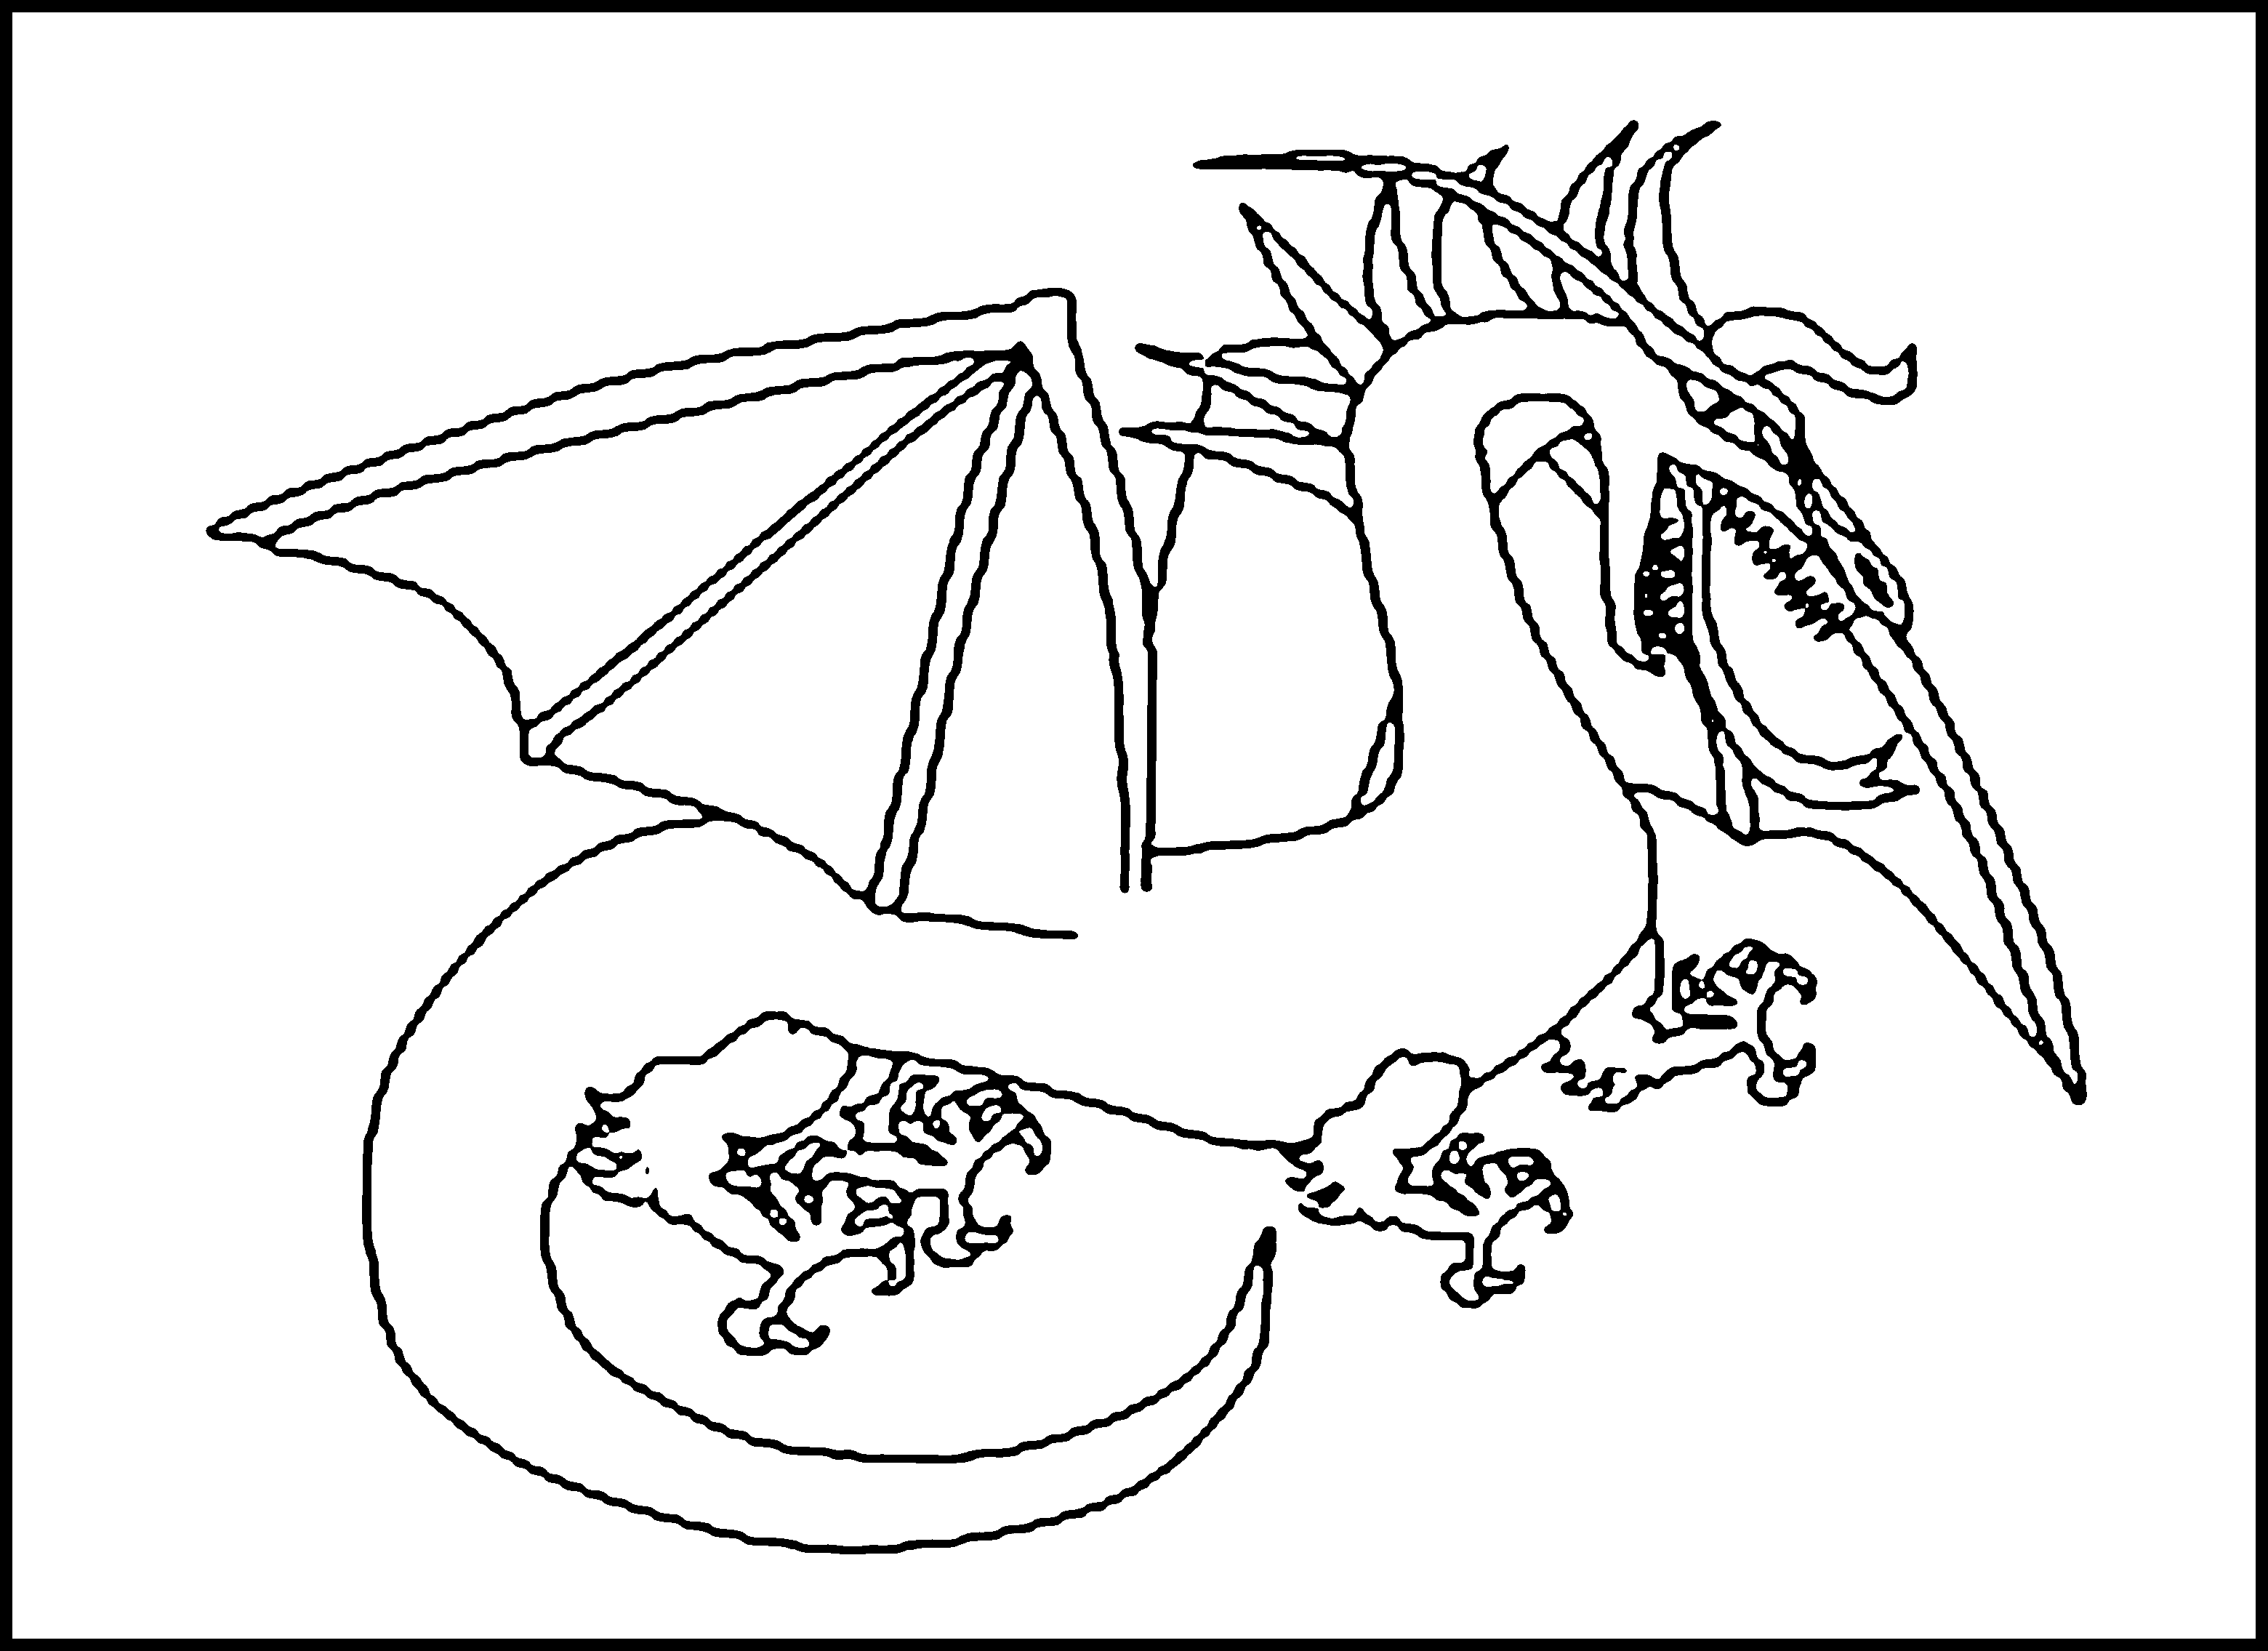 Printable Pictures Of Dragons